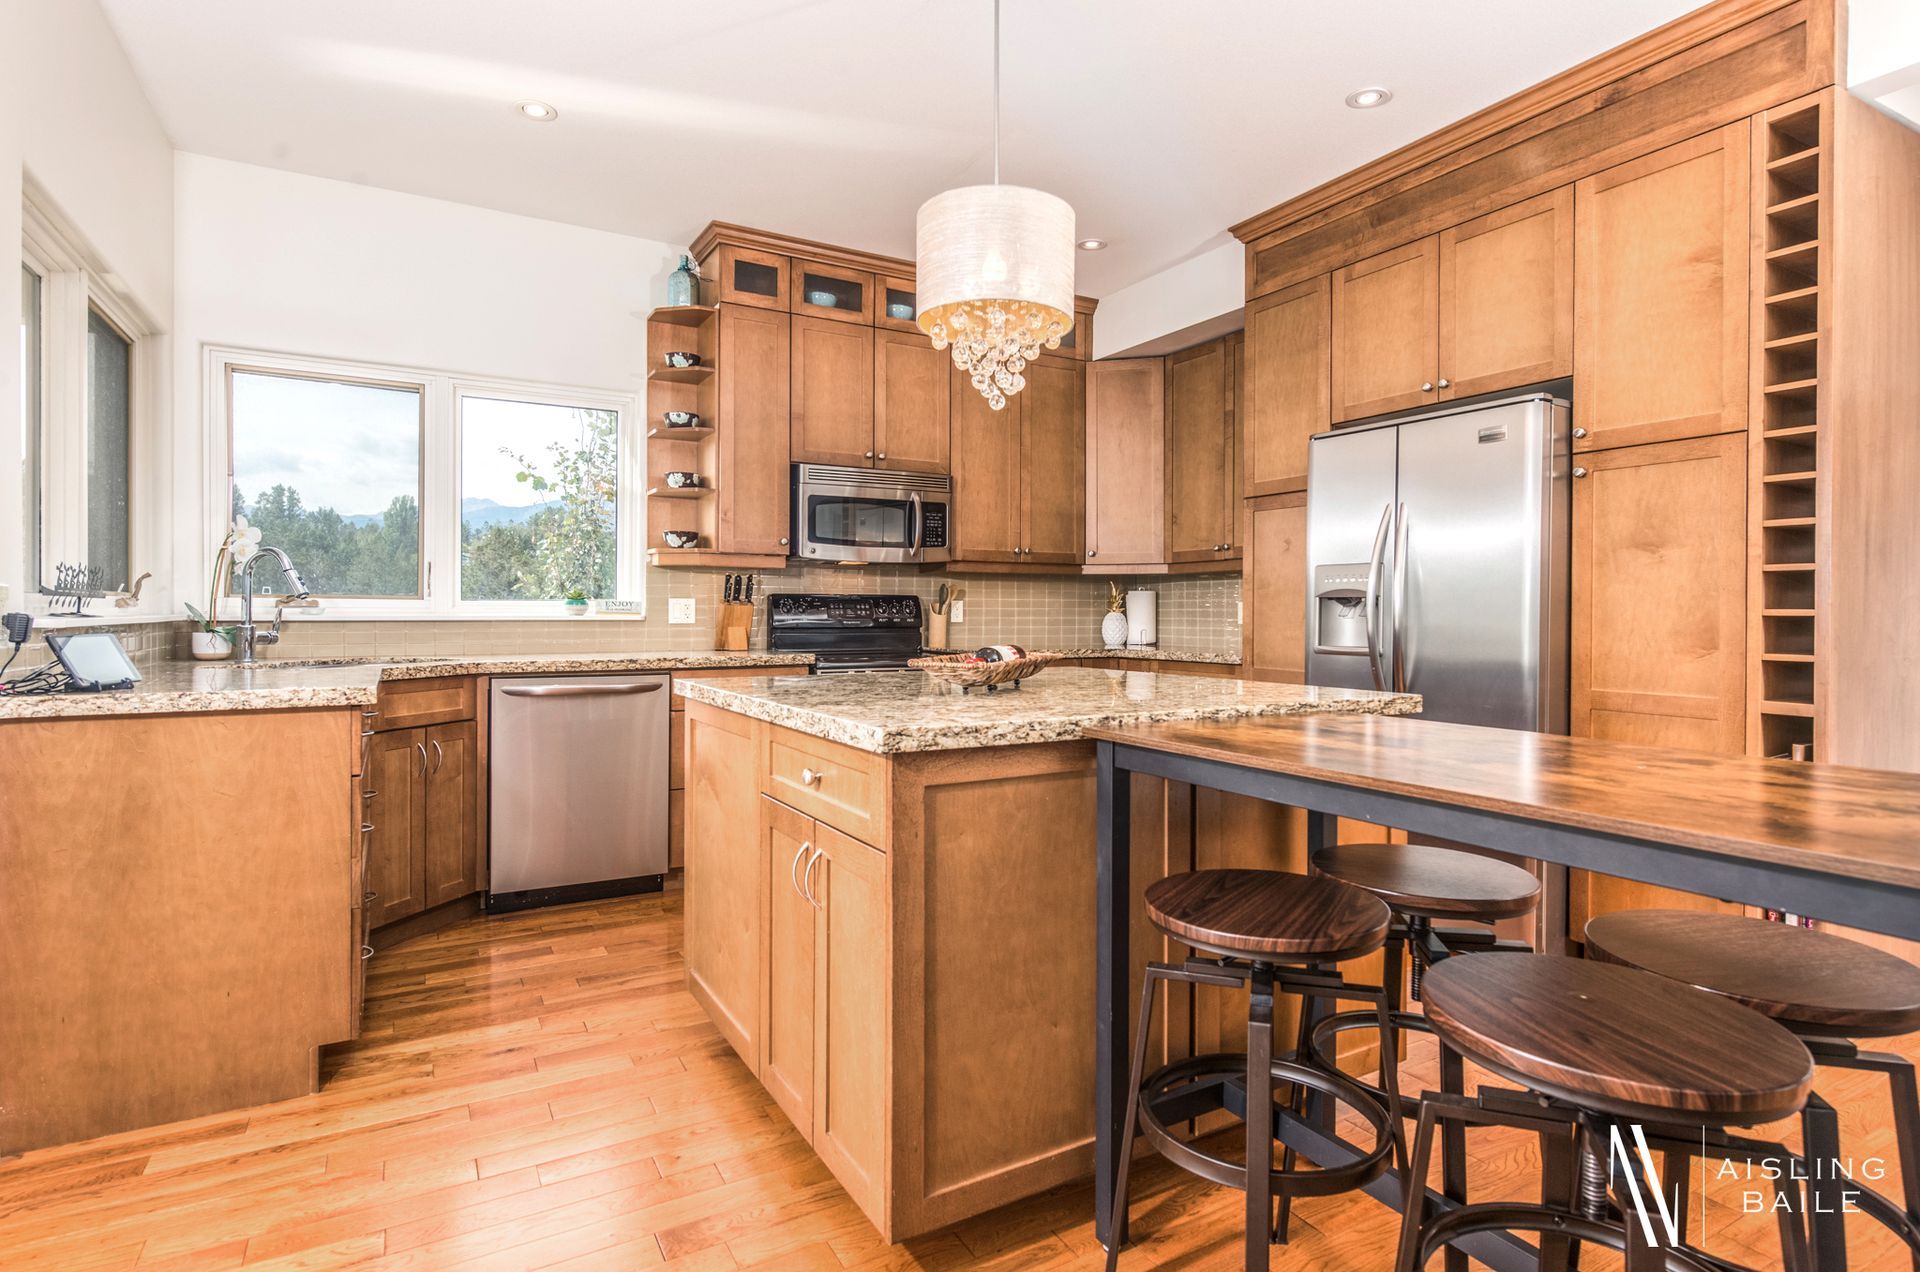 Full kitchen of Central Elegance, an Invermere BC Vacation Rental hosted by Aisling Baile Property Management.